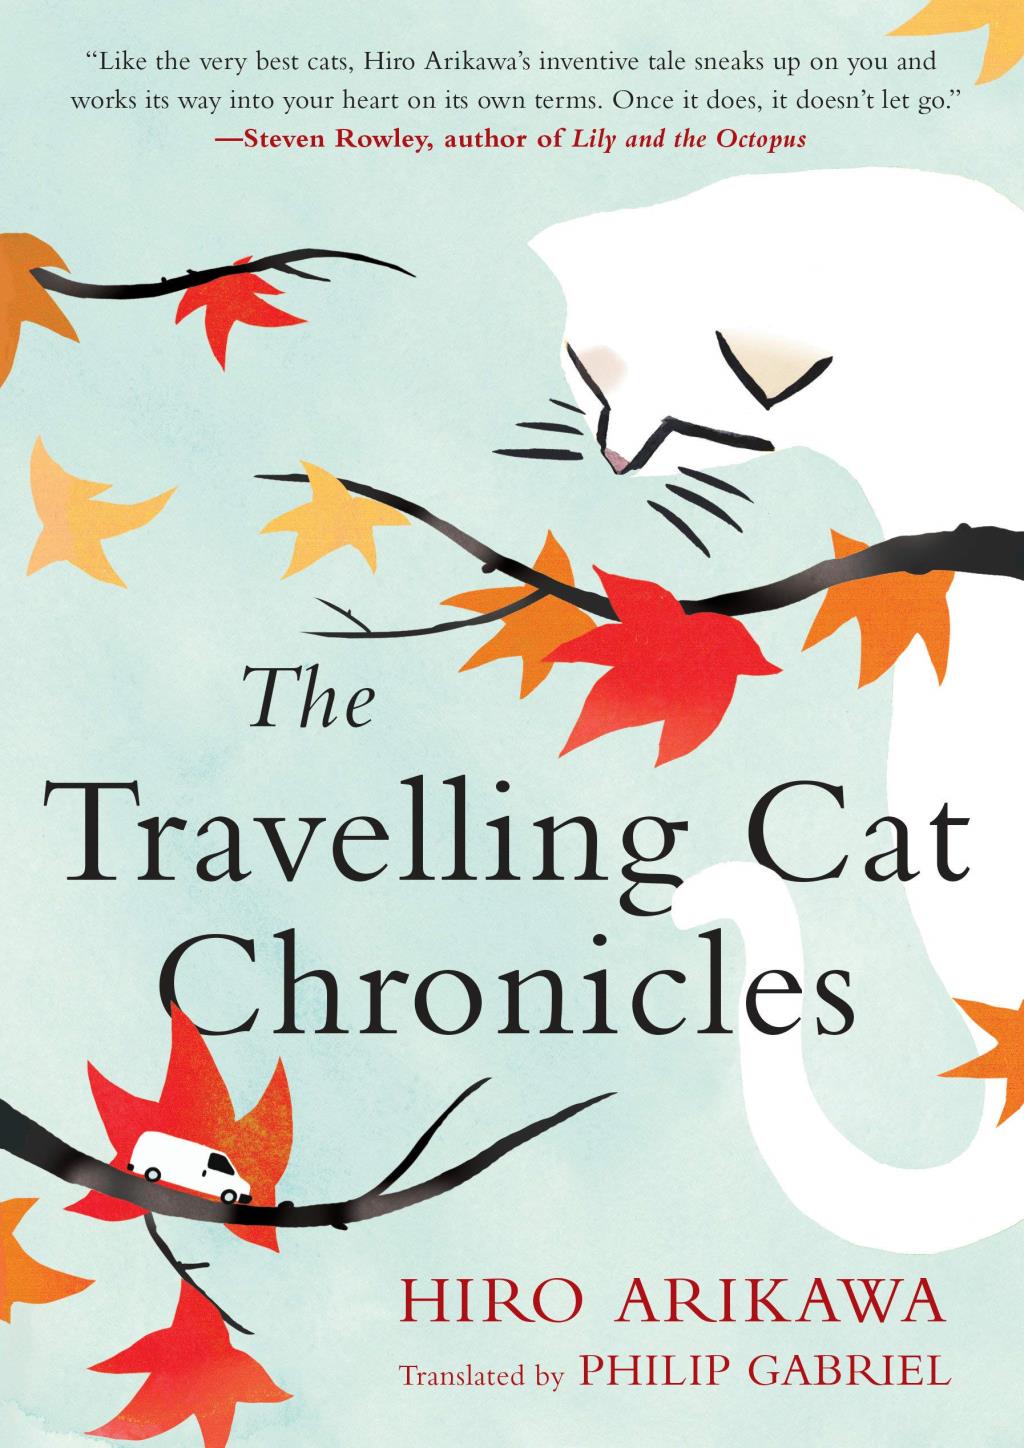 travelling cat chronicles book cover